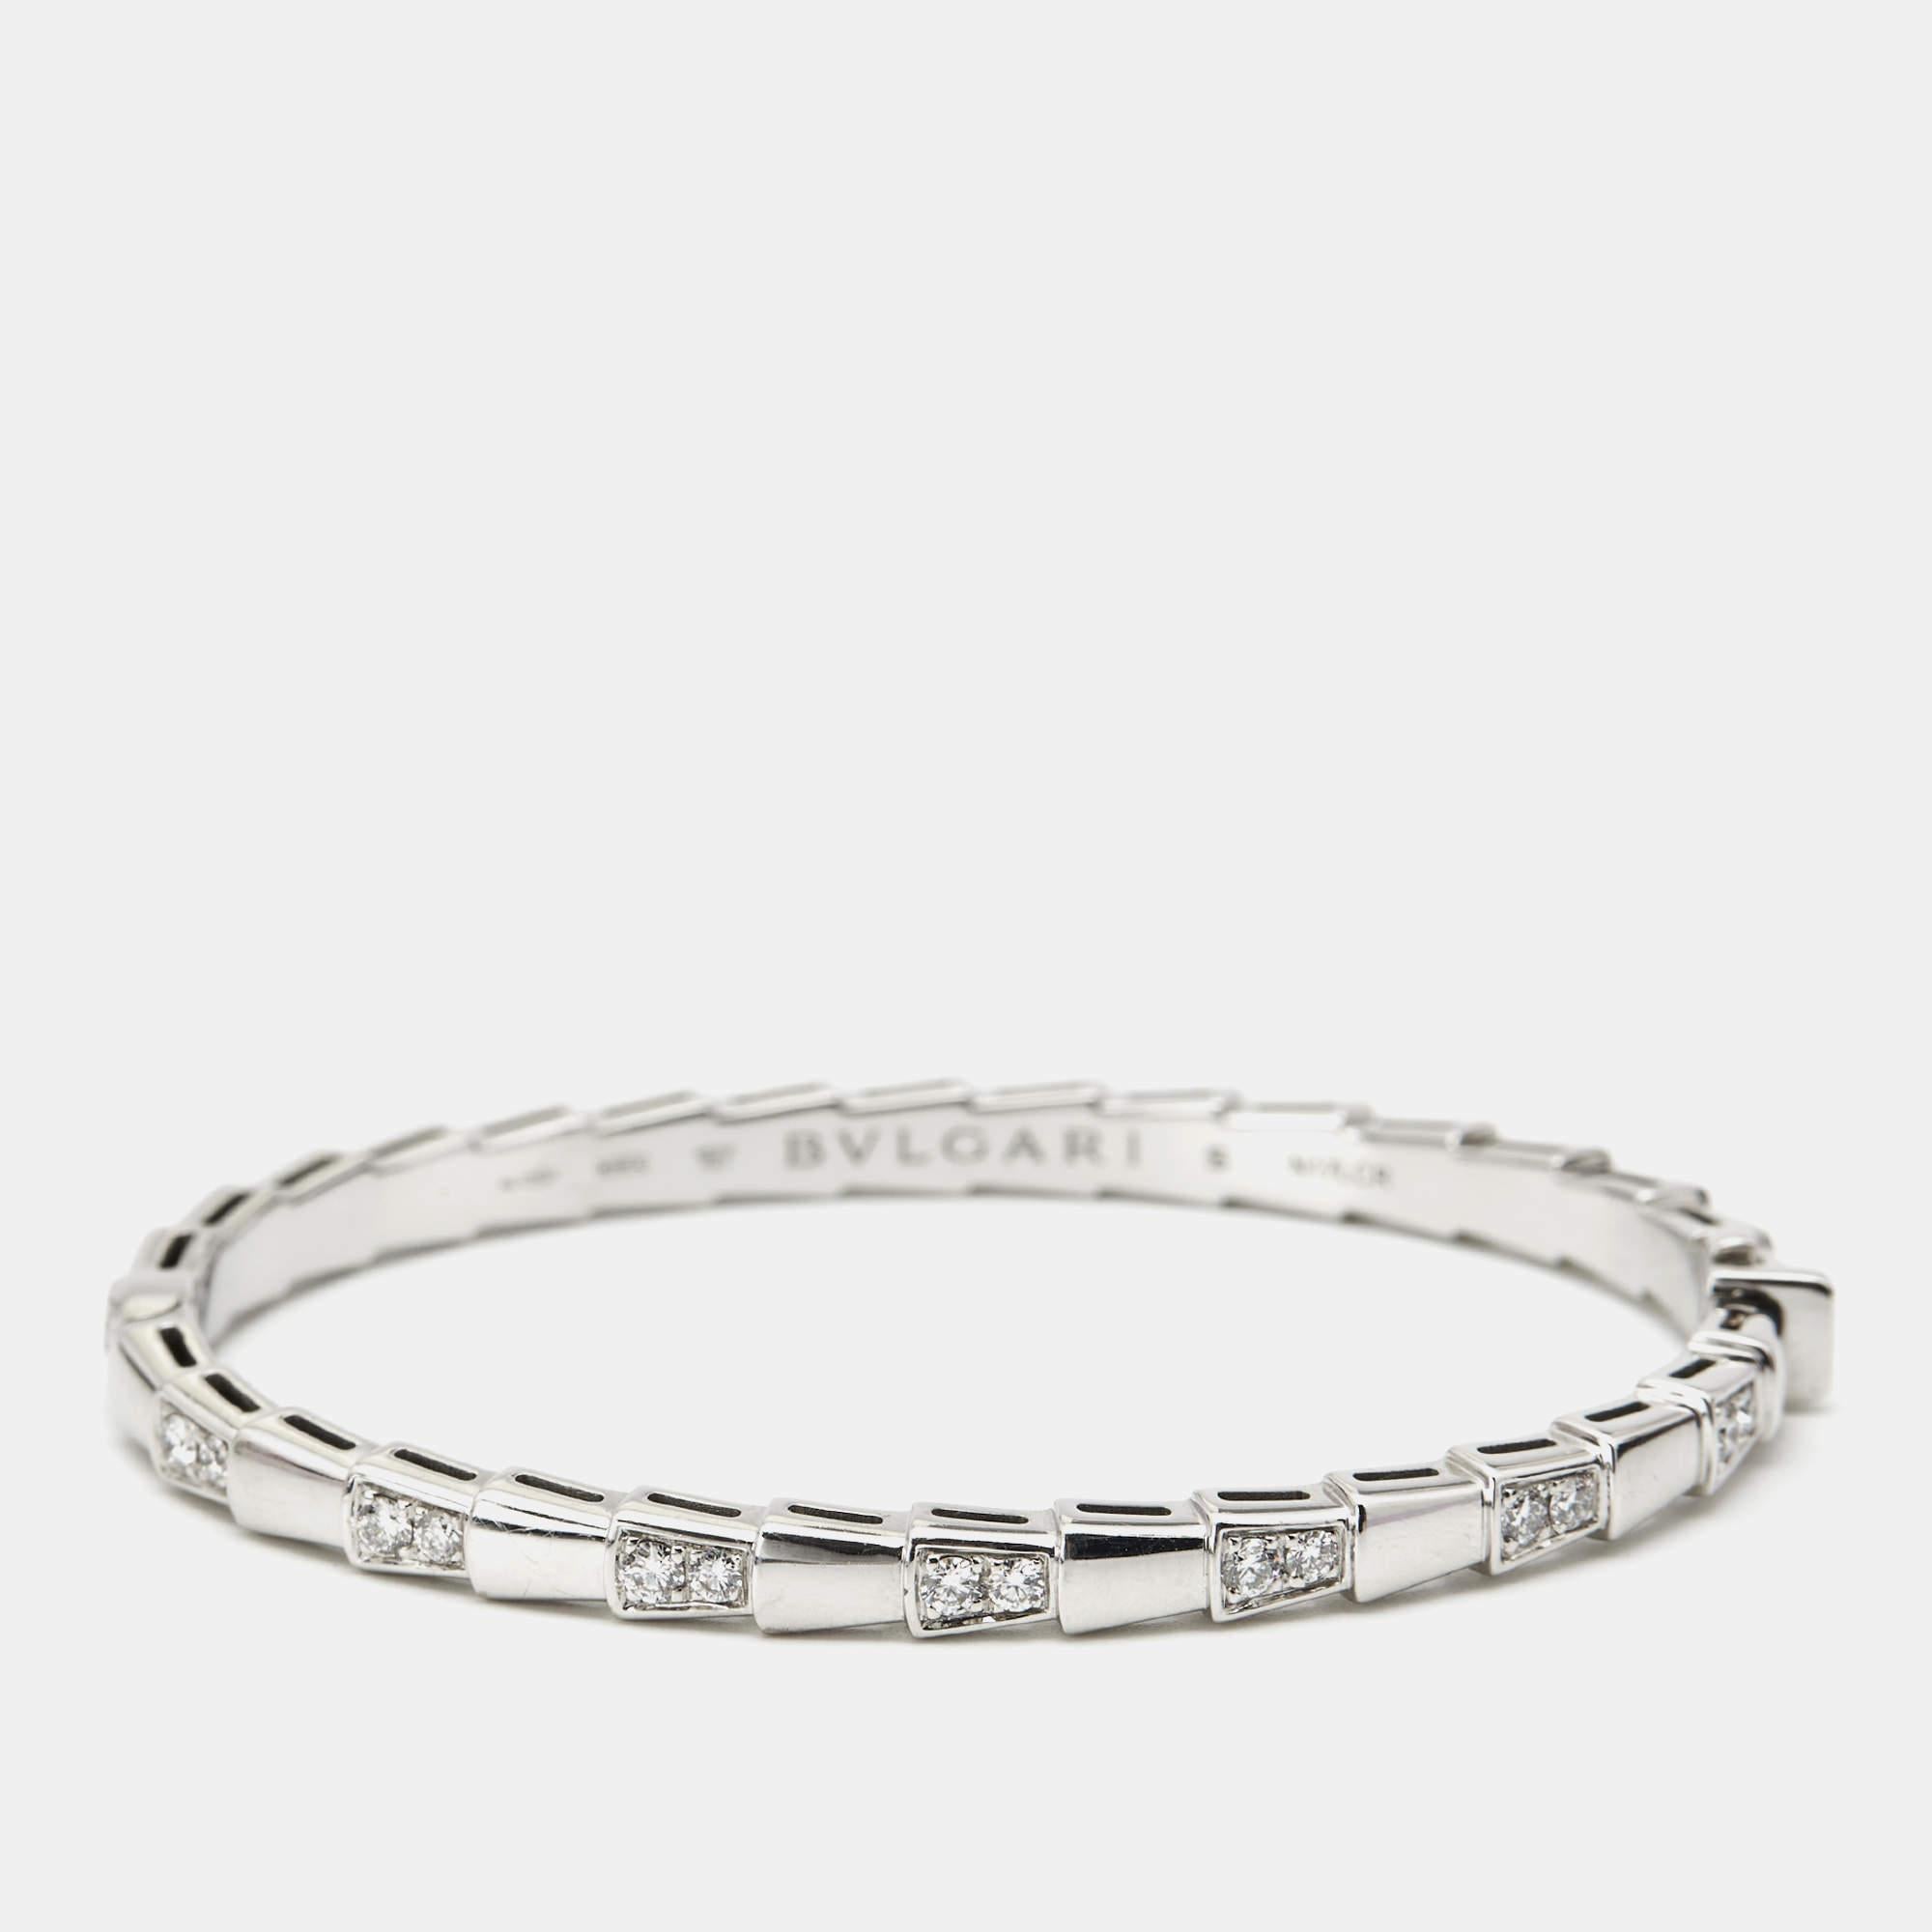 Inspired by the viper’s spiral movements, this stunning Bvlgari Serpenti Viper bracelet will wrap sensually around your wrist. Distinguished by the alluring beauty of the viper's scales, this 18K white gold ring highlights the entire design with